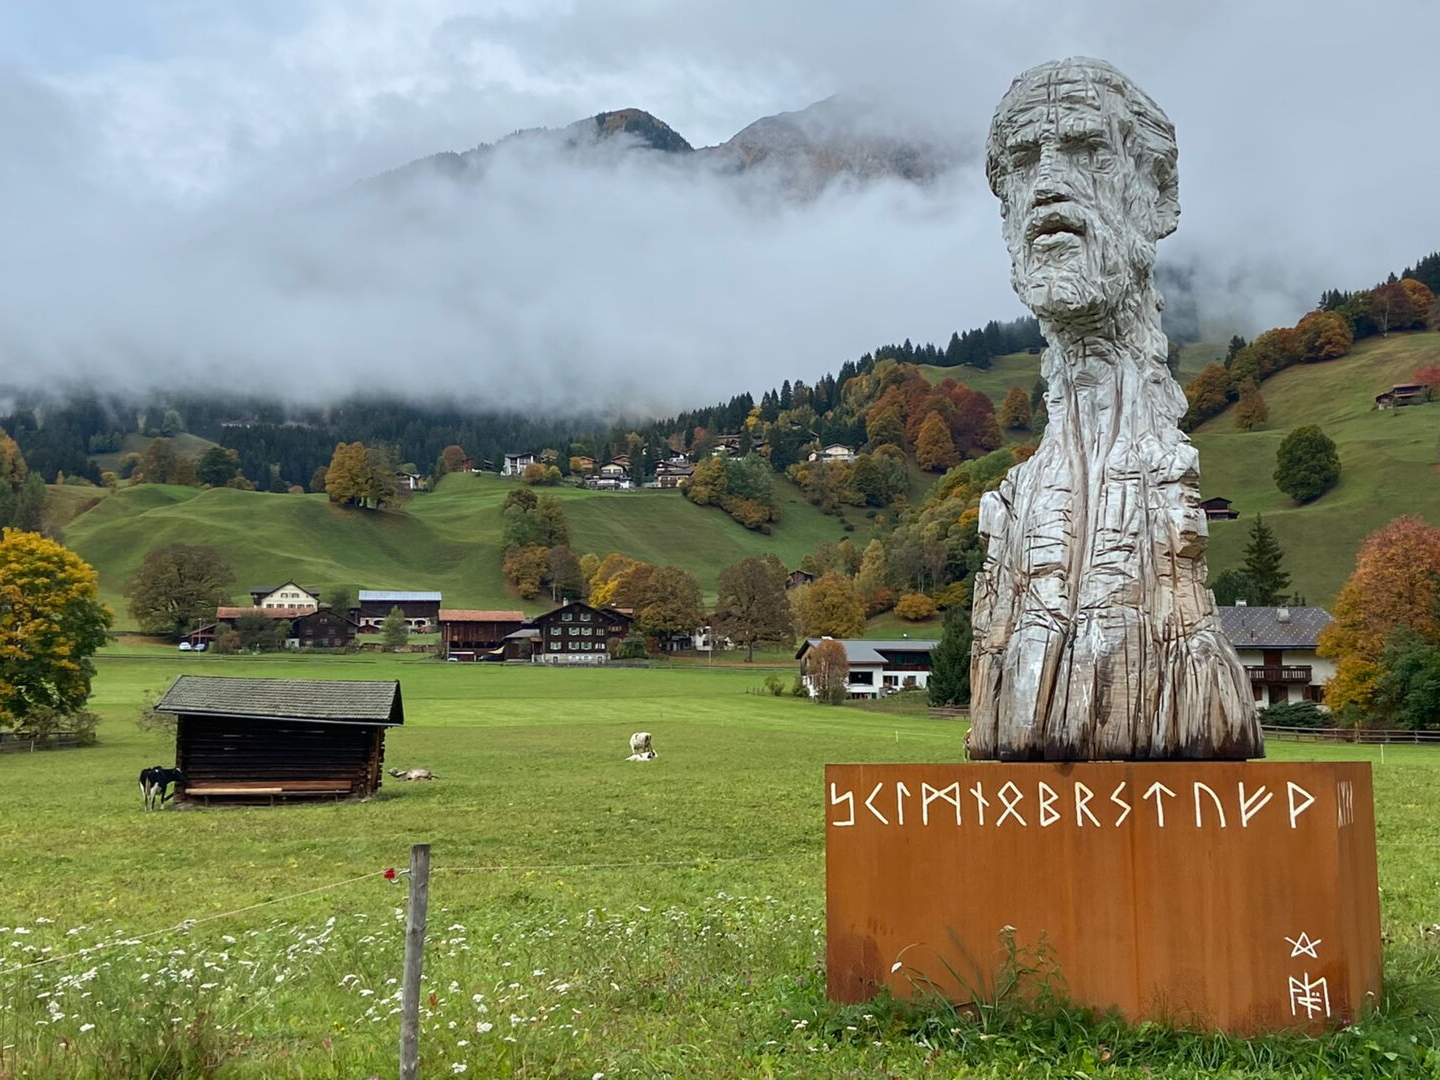 Local artists in Klosters